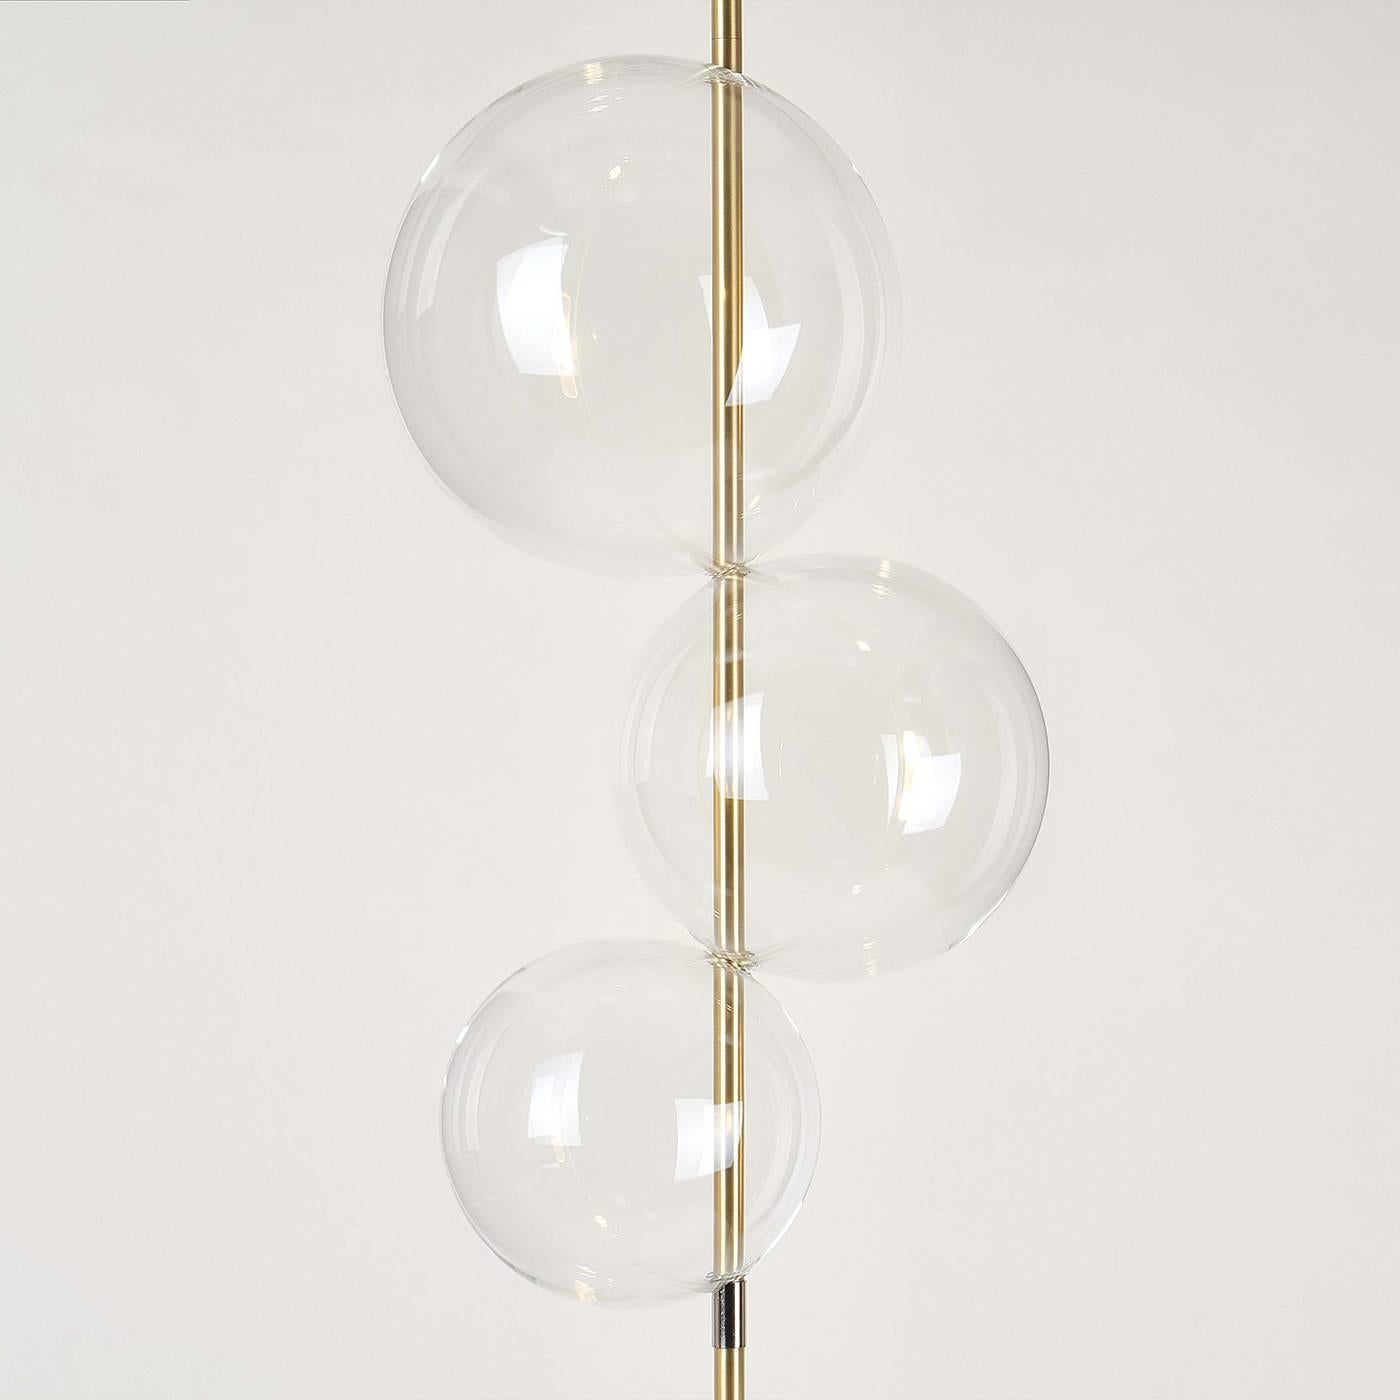 The shape of this exquisite floor lamp is inspired by hail (